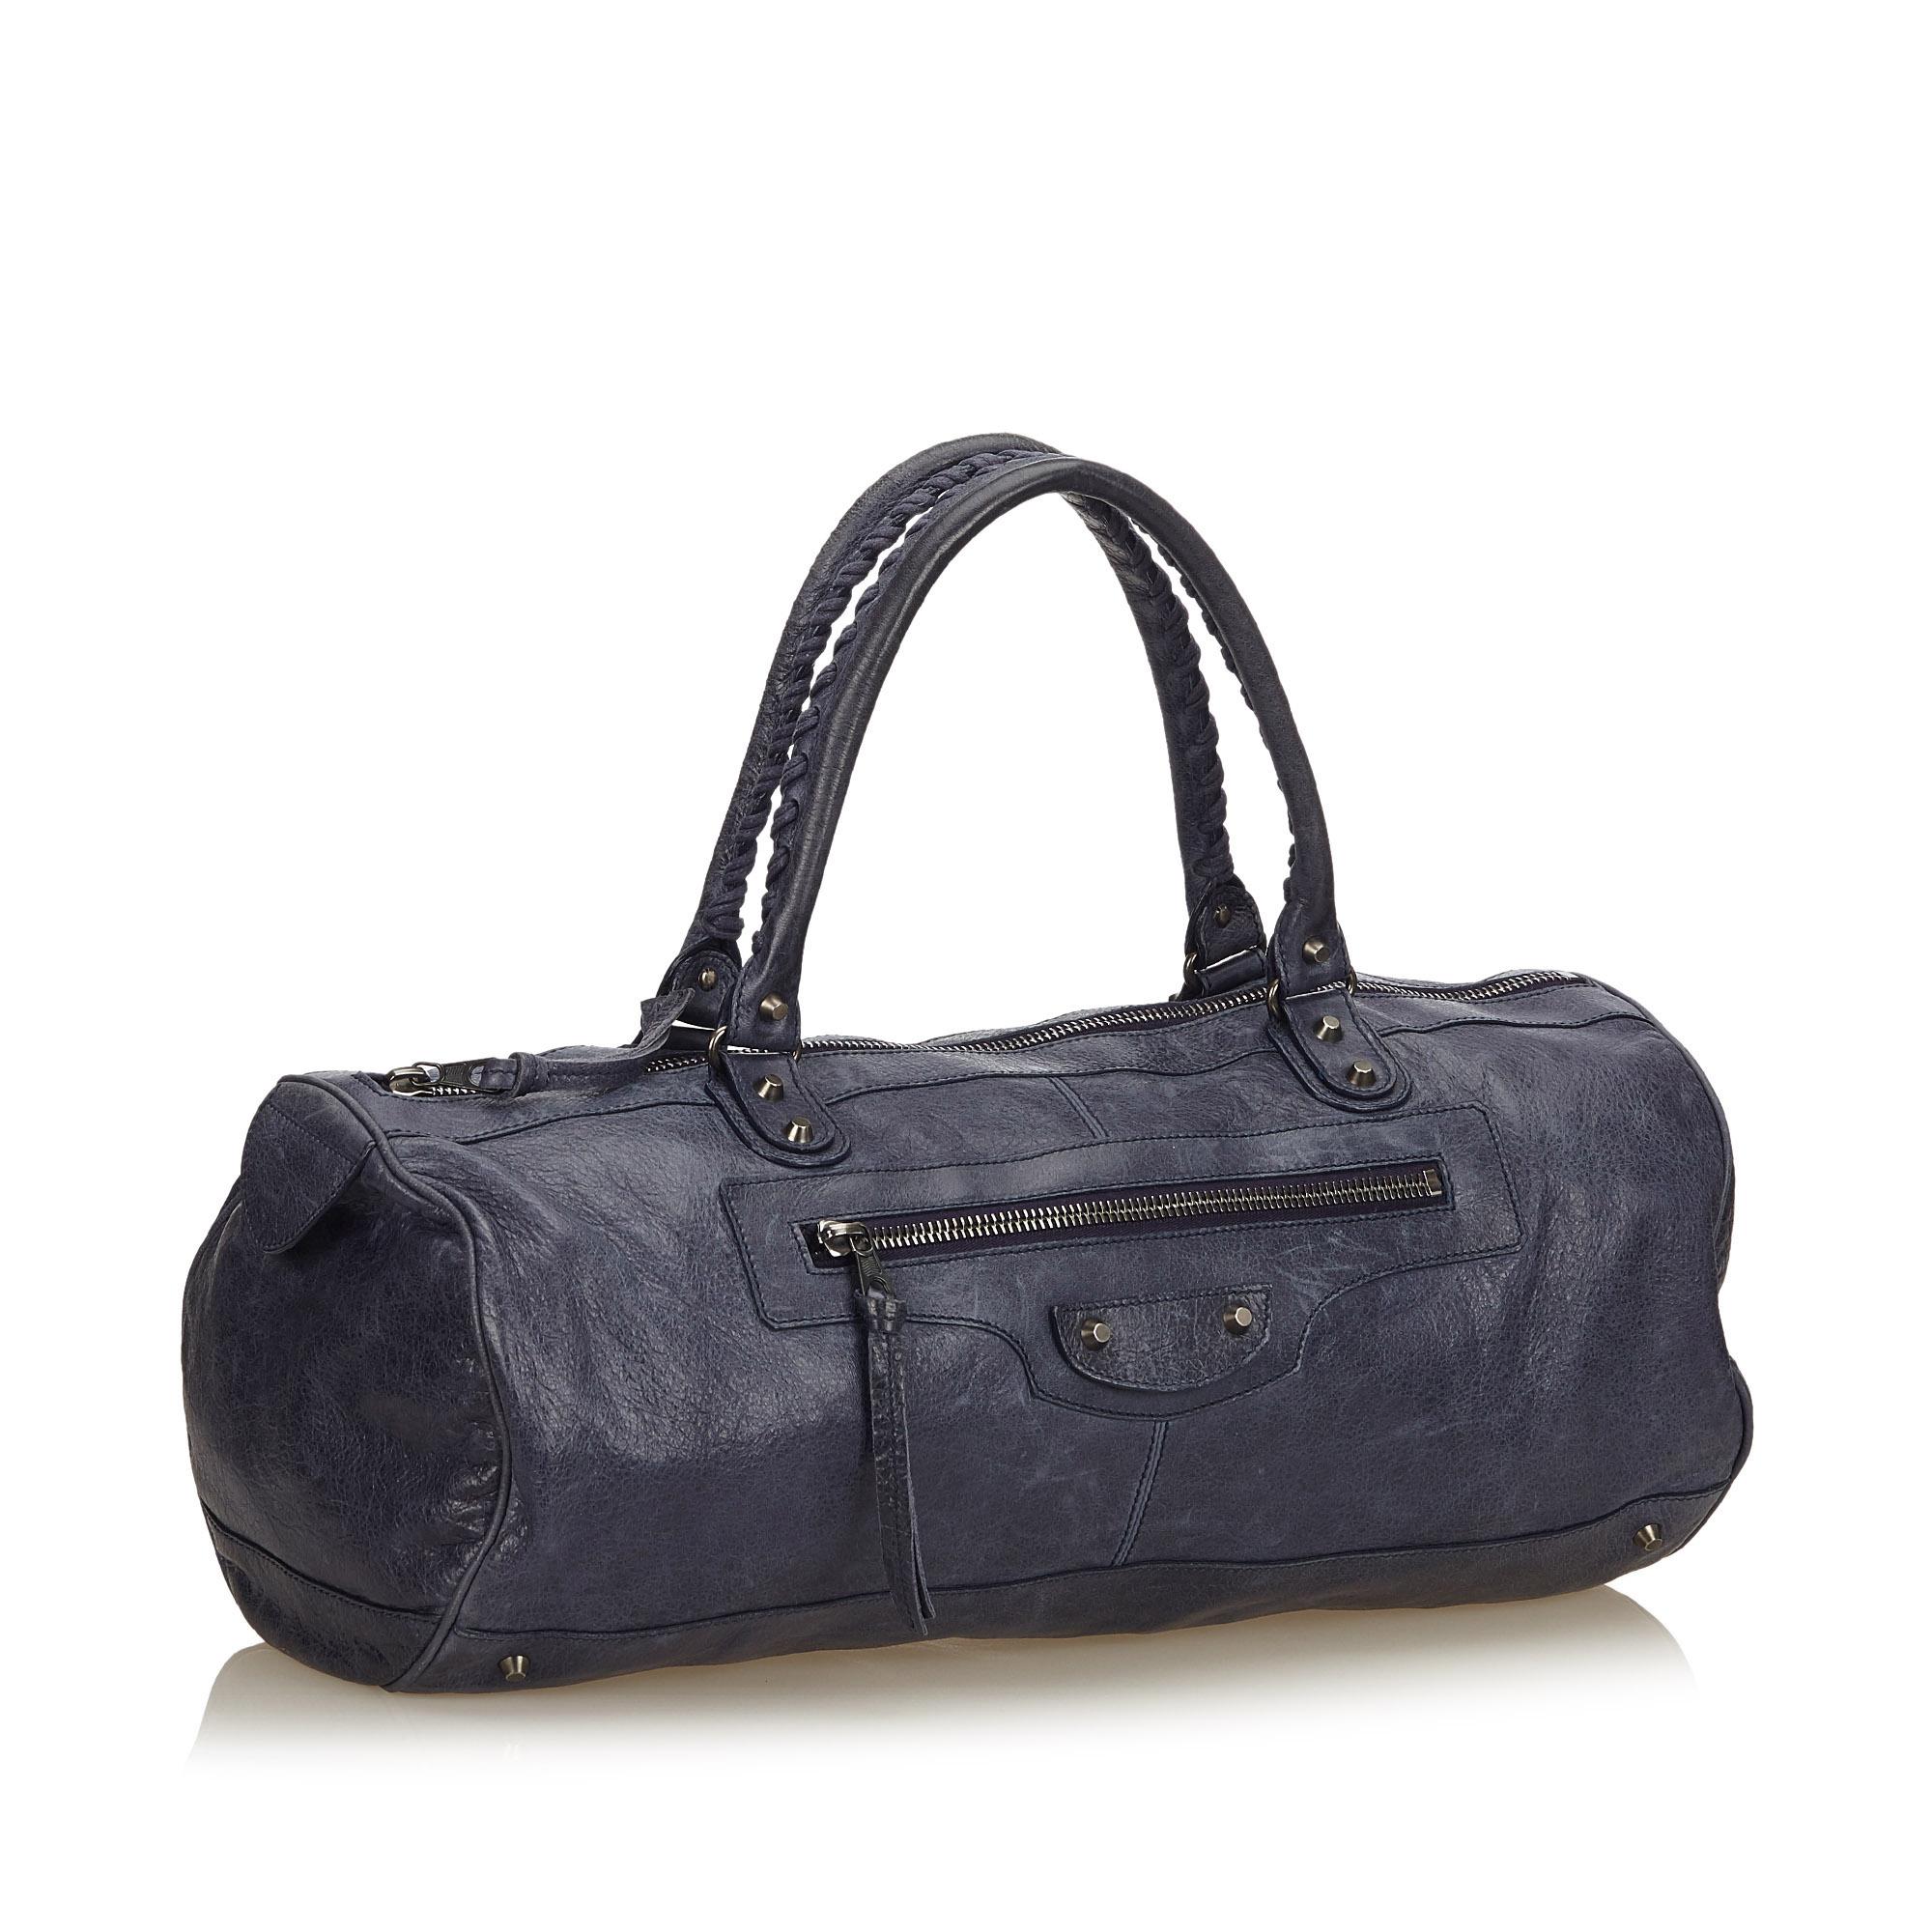 This hand bag features a leather body, rolled leather handles, top zip closure and interior zip pocket. It carries as B+ condition rating.

Inclusions: 
Dust Bag

Dimensions:
Length: 21.00 cm
Width: 50.00 cm
Depth: 17.00 cm
Hand Drop: 17.00